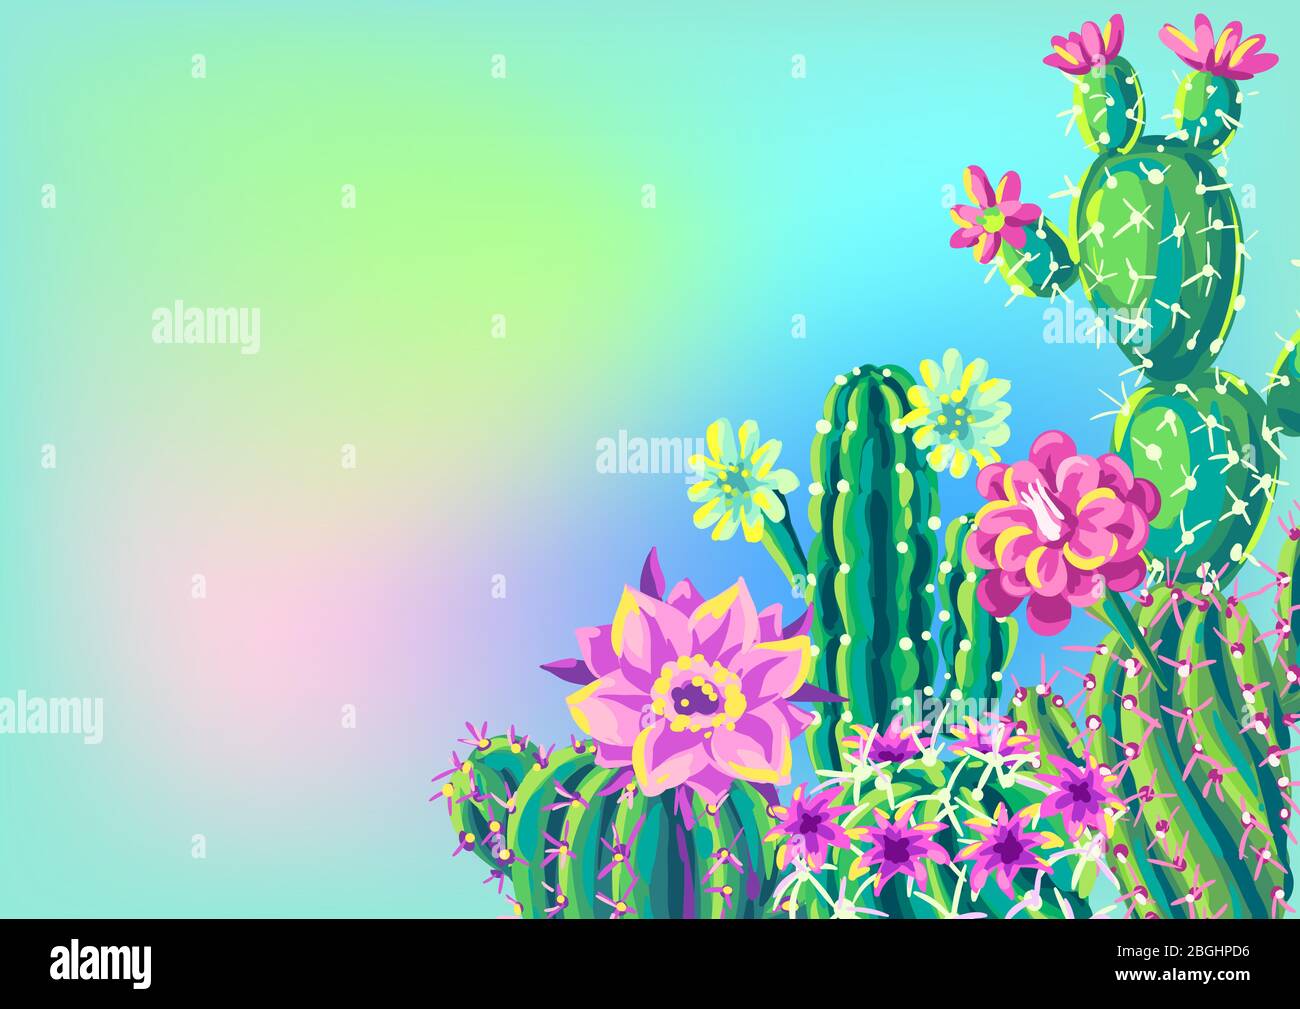 Background with cacti and flowers. Stock Vector